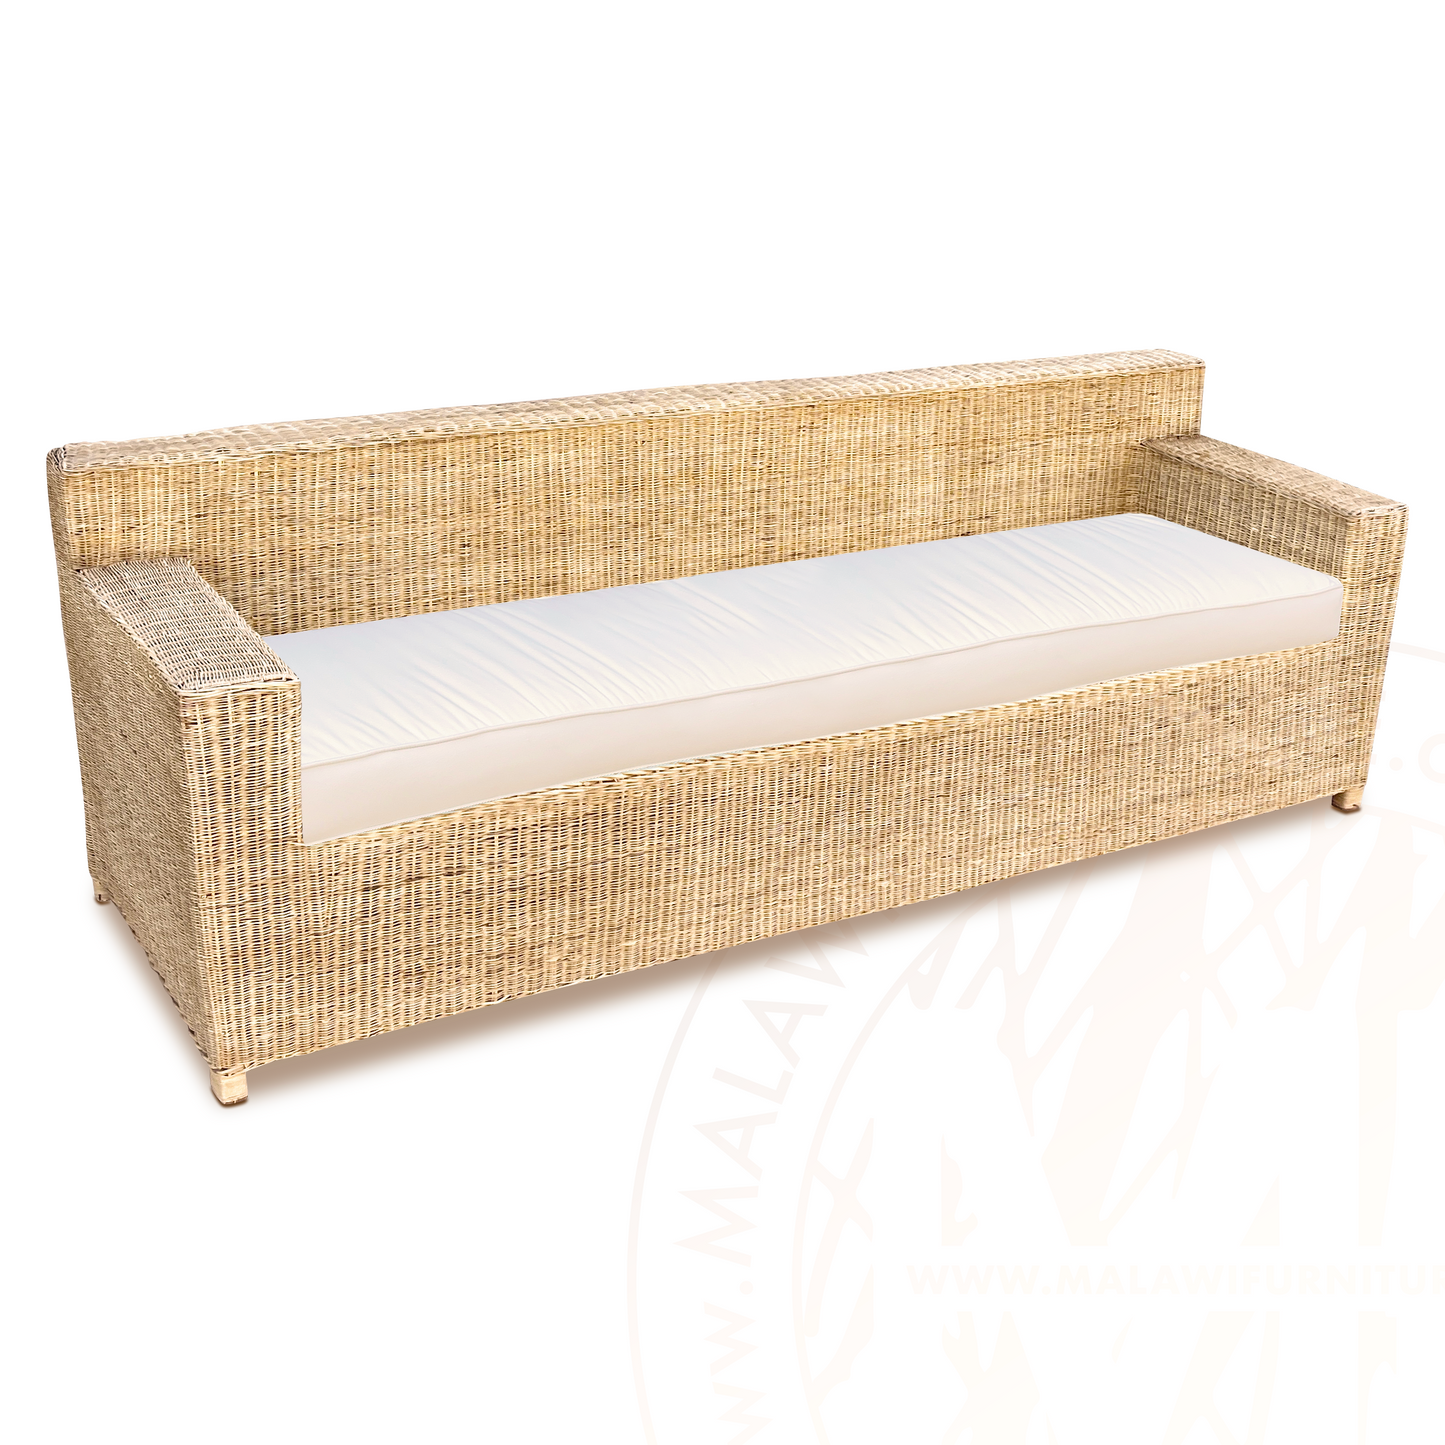 BOX Malawi Couch – Three Seater hand weaved woven rattan cane chair malawi with bull denim cotton cushion natural colour